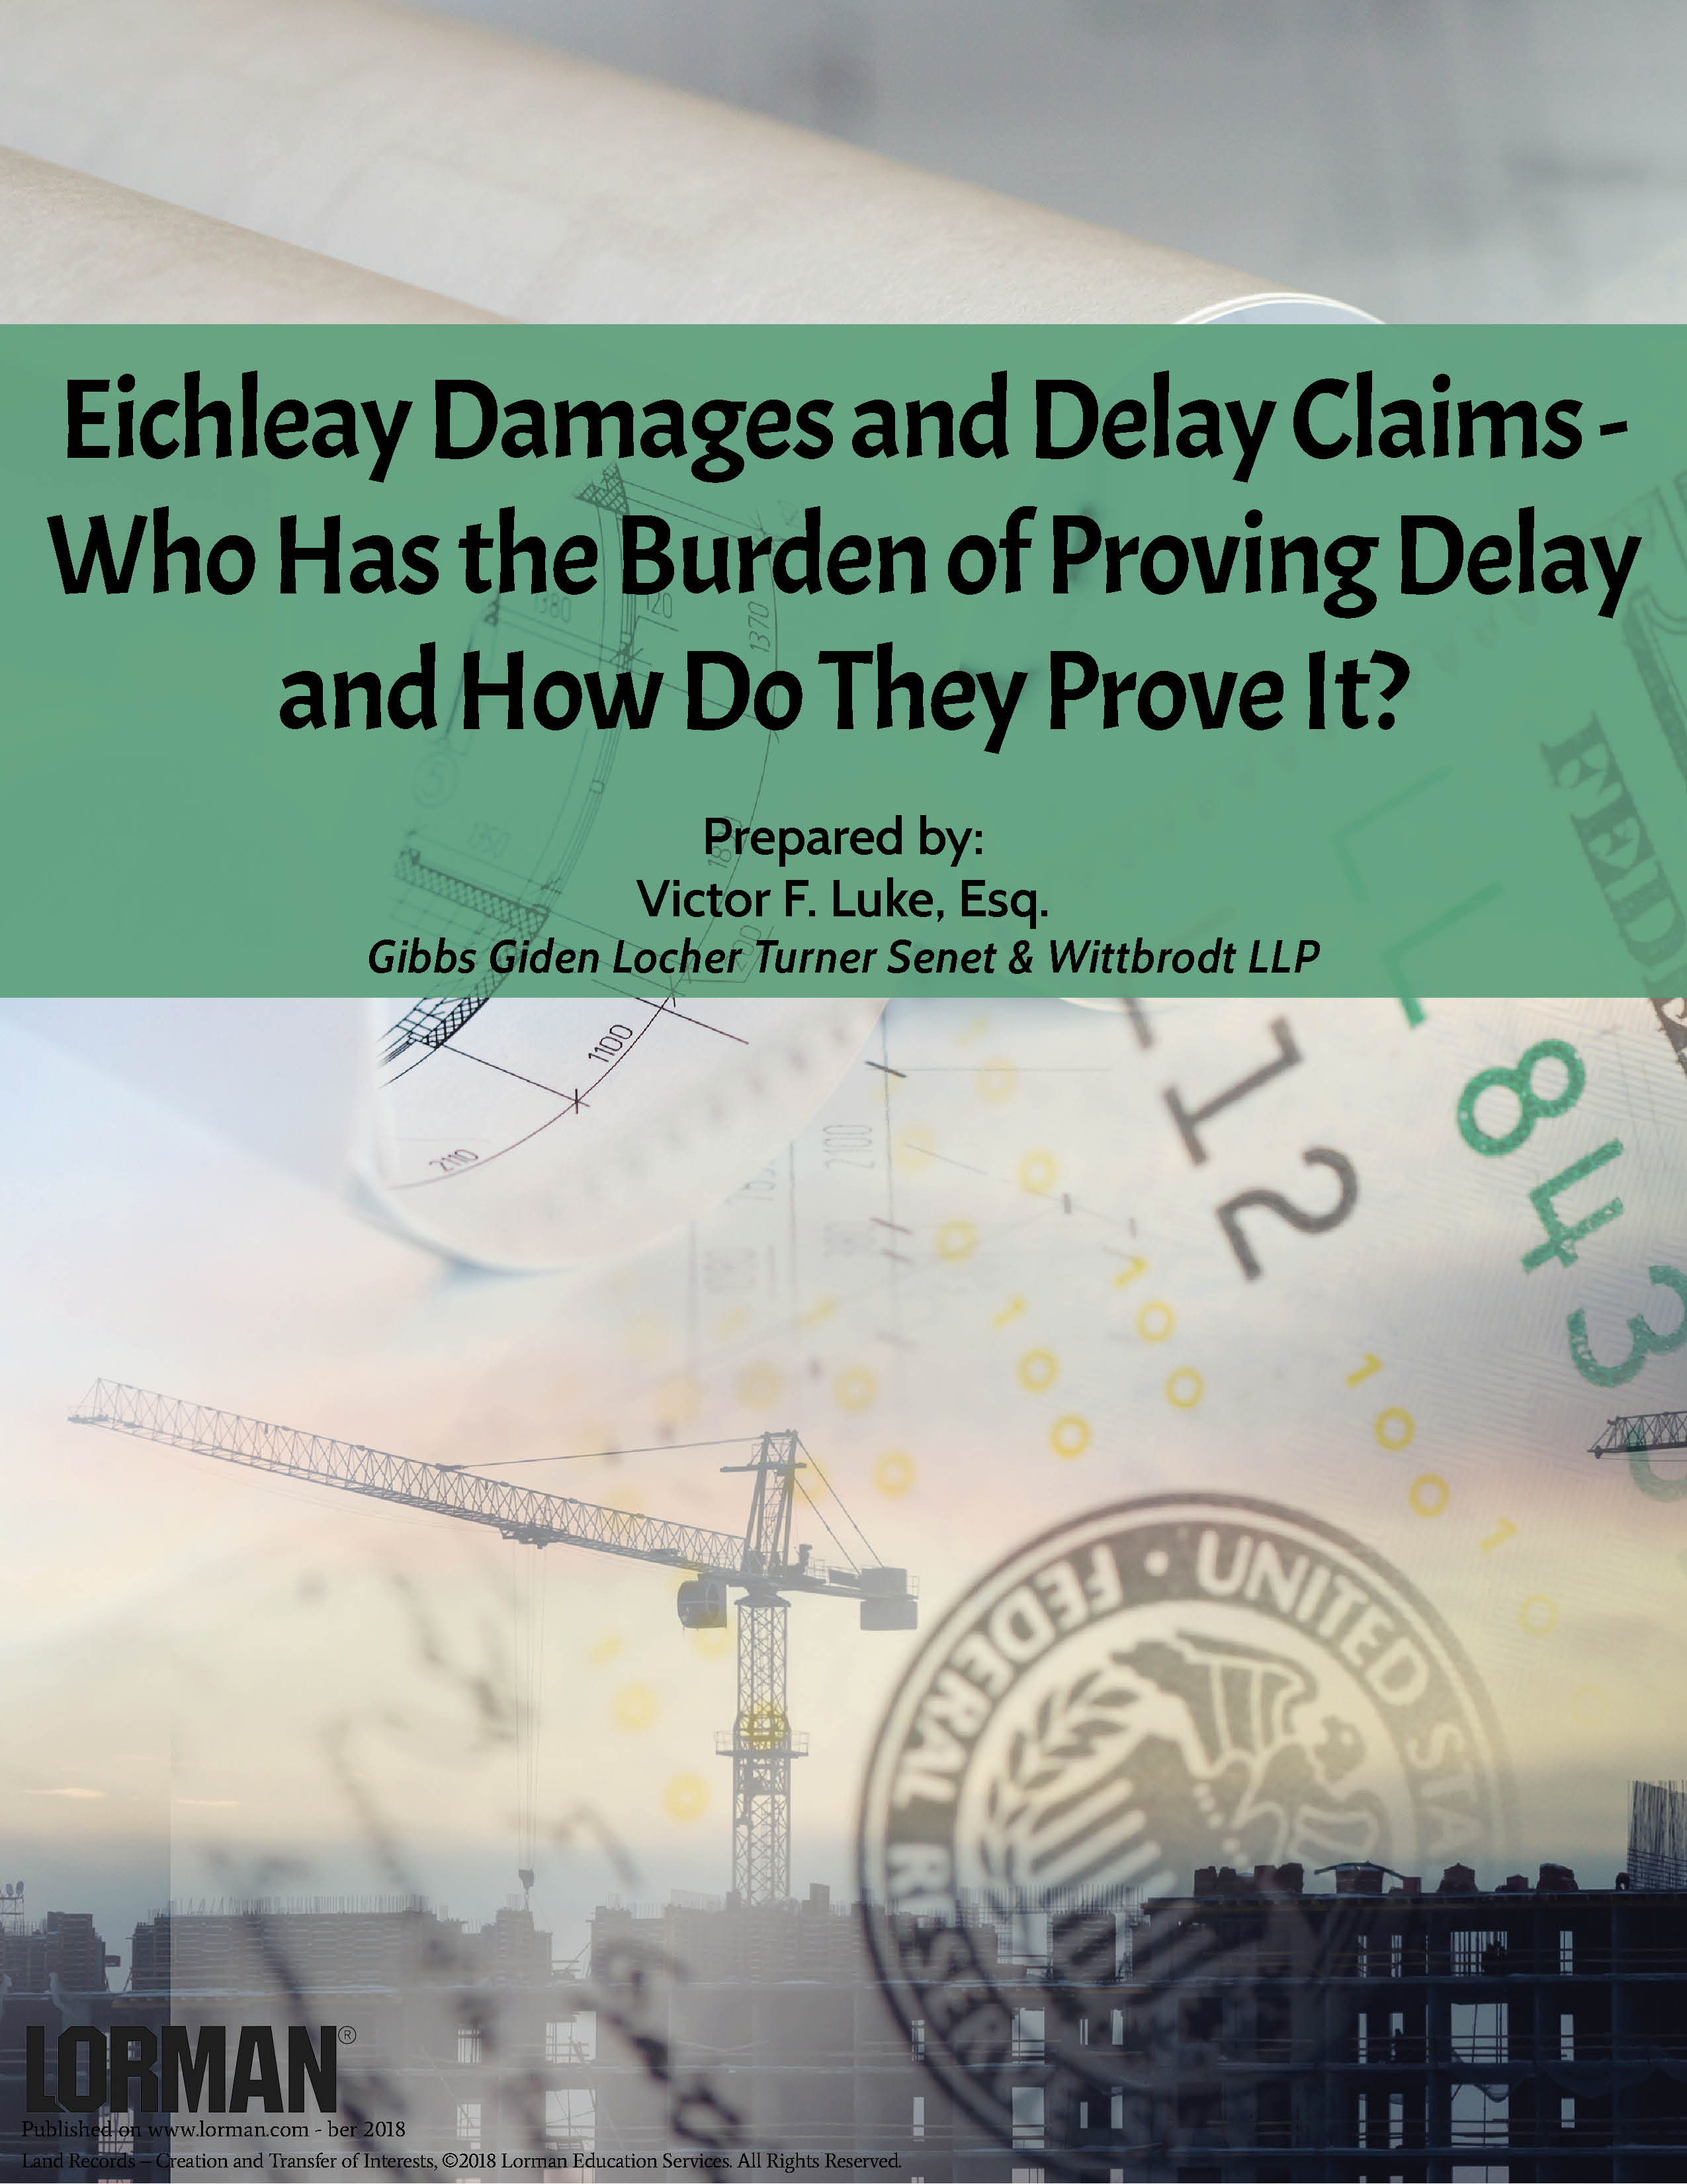 Eichleay Damages and Delay Claims - Who Has the Burden of Proving Delay and How Do They Prove It?